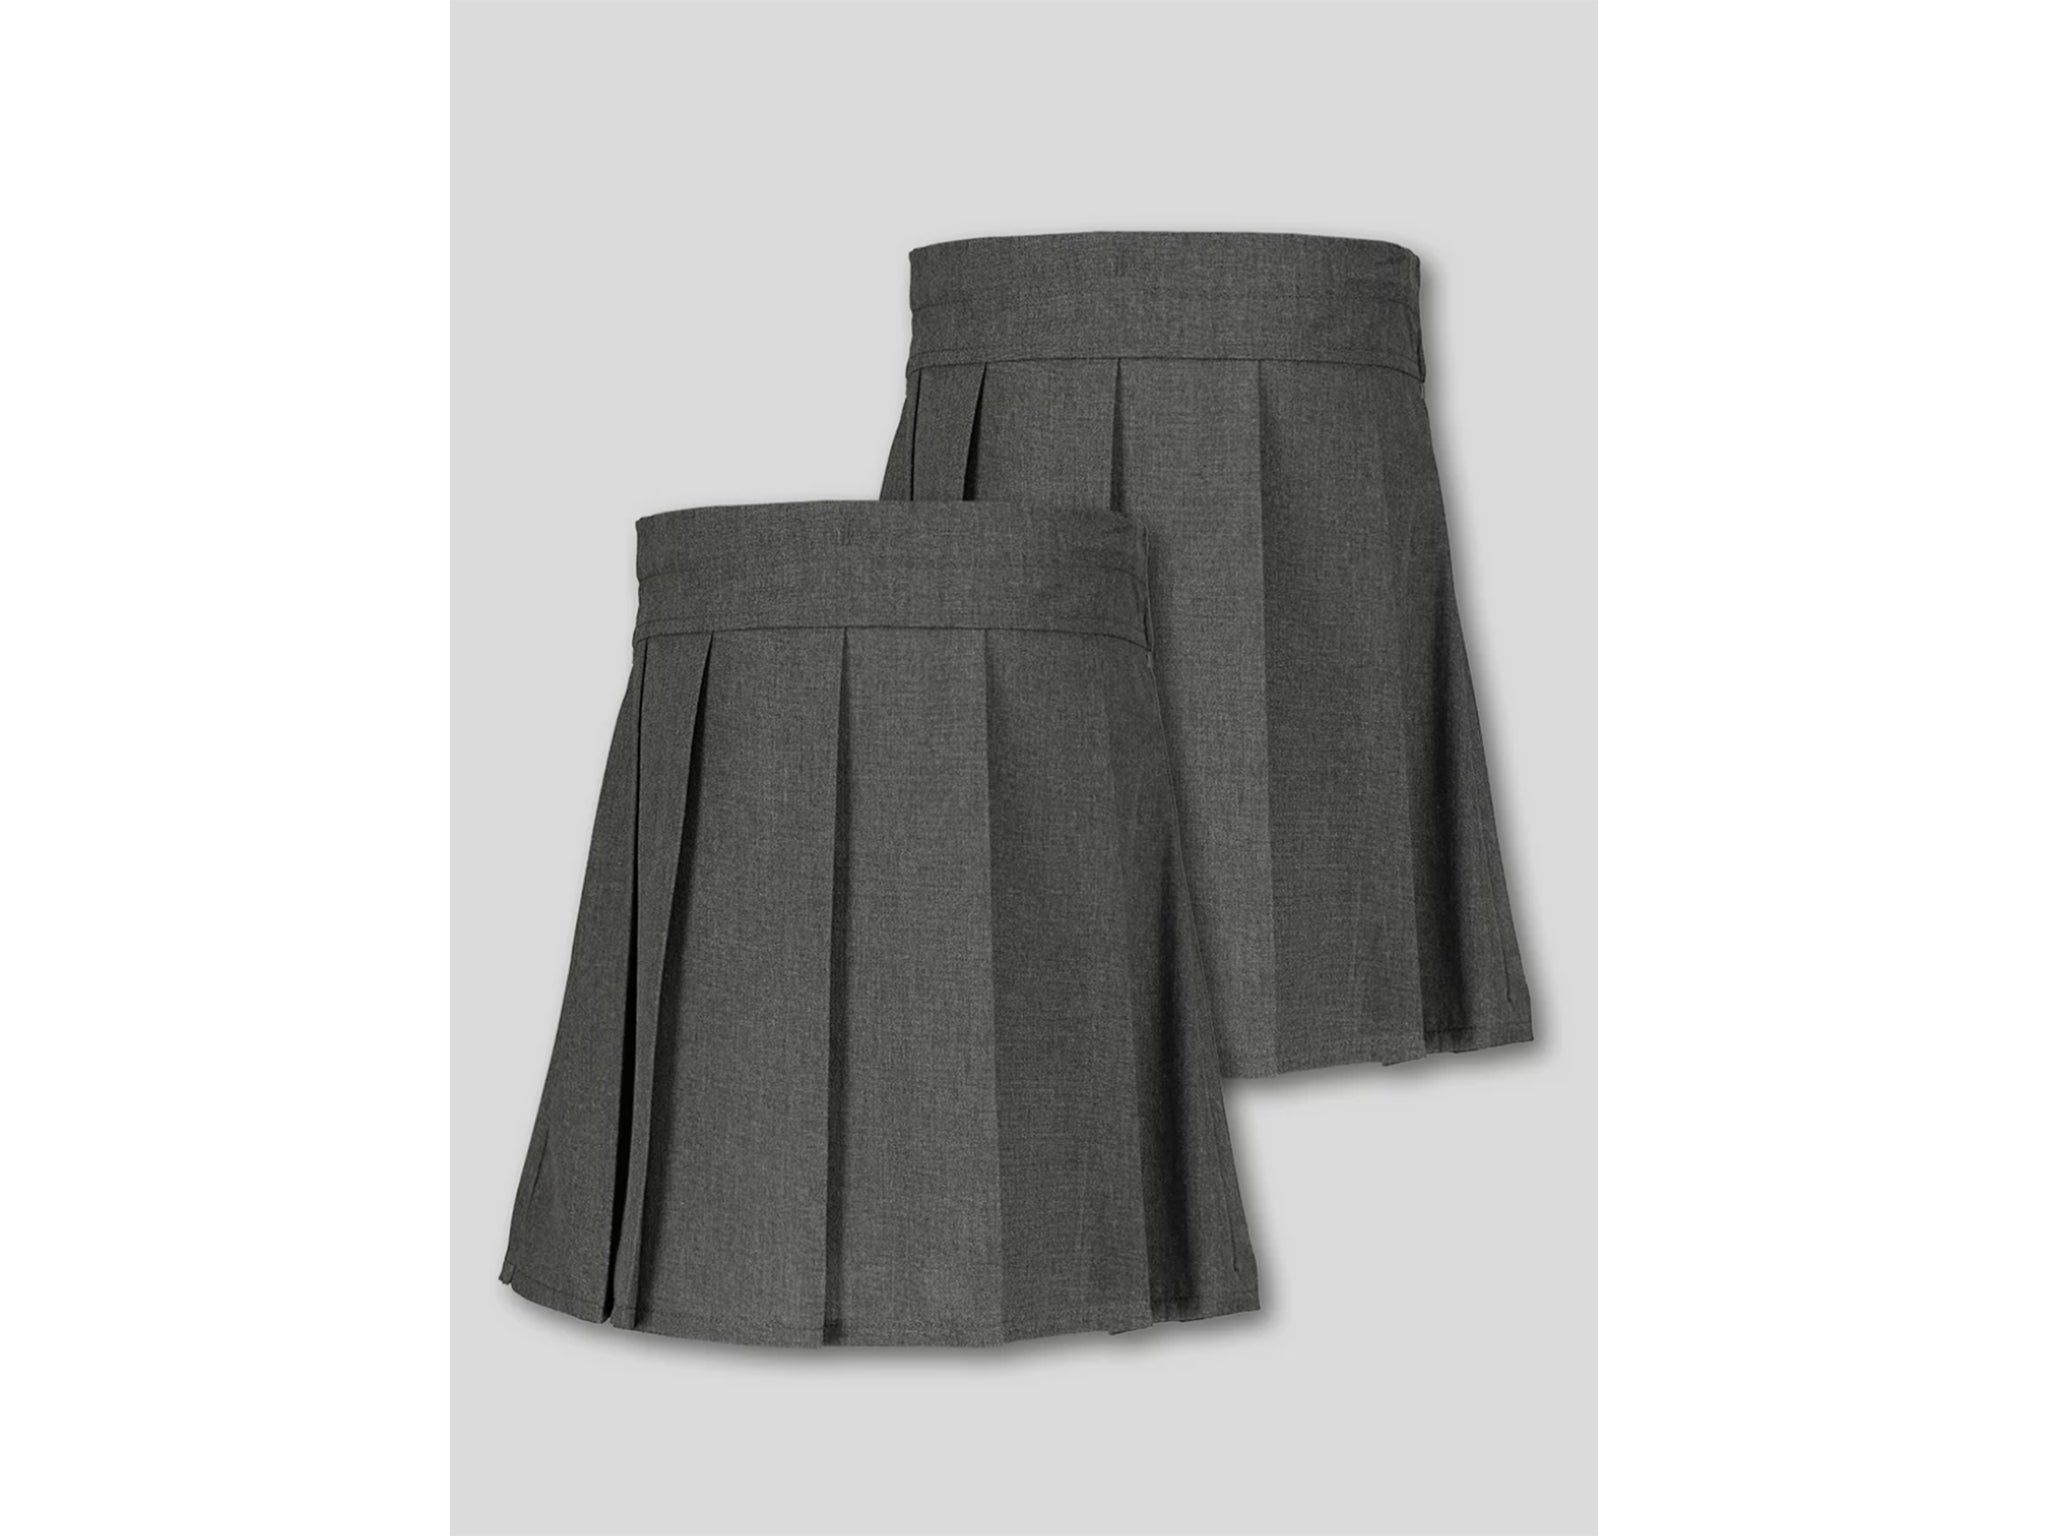 Pick up a two-pack of skirts to save on washing